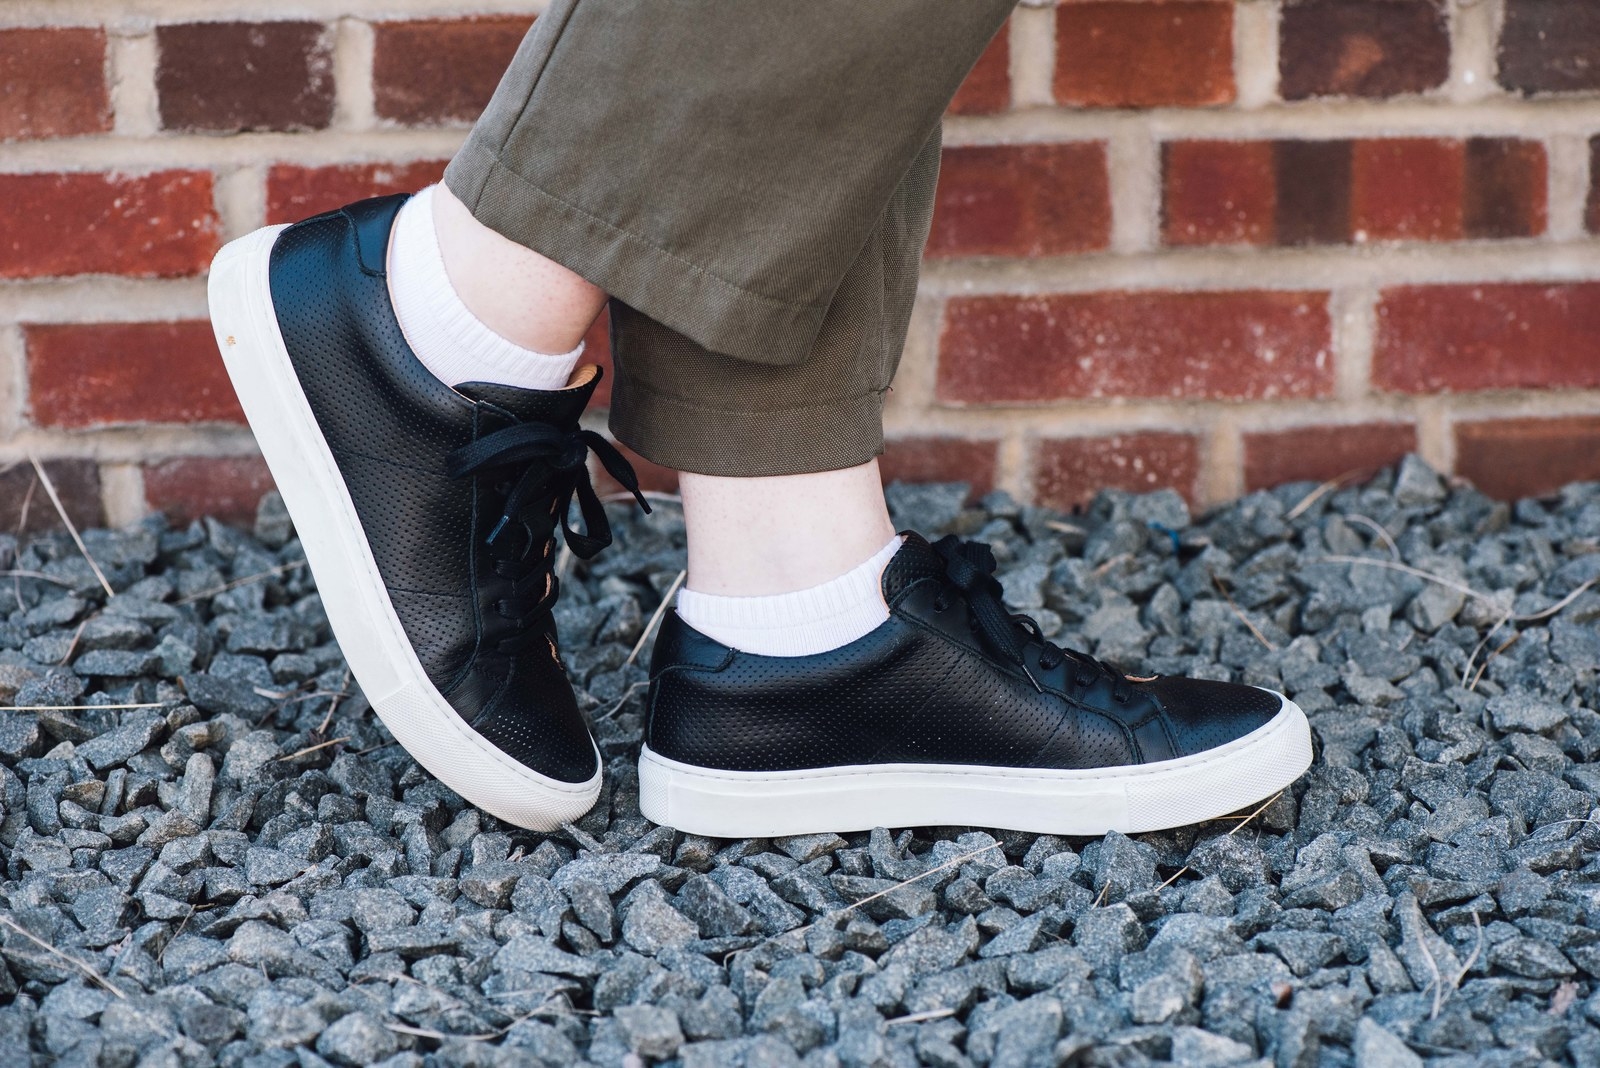 32 Pairs Of Shoes For People Who Only Wear Black To Wear This Winter